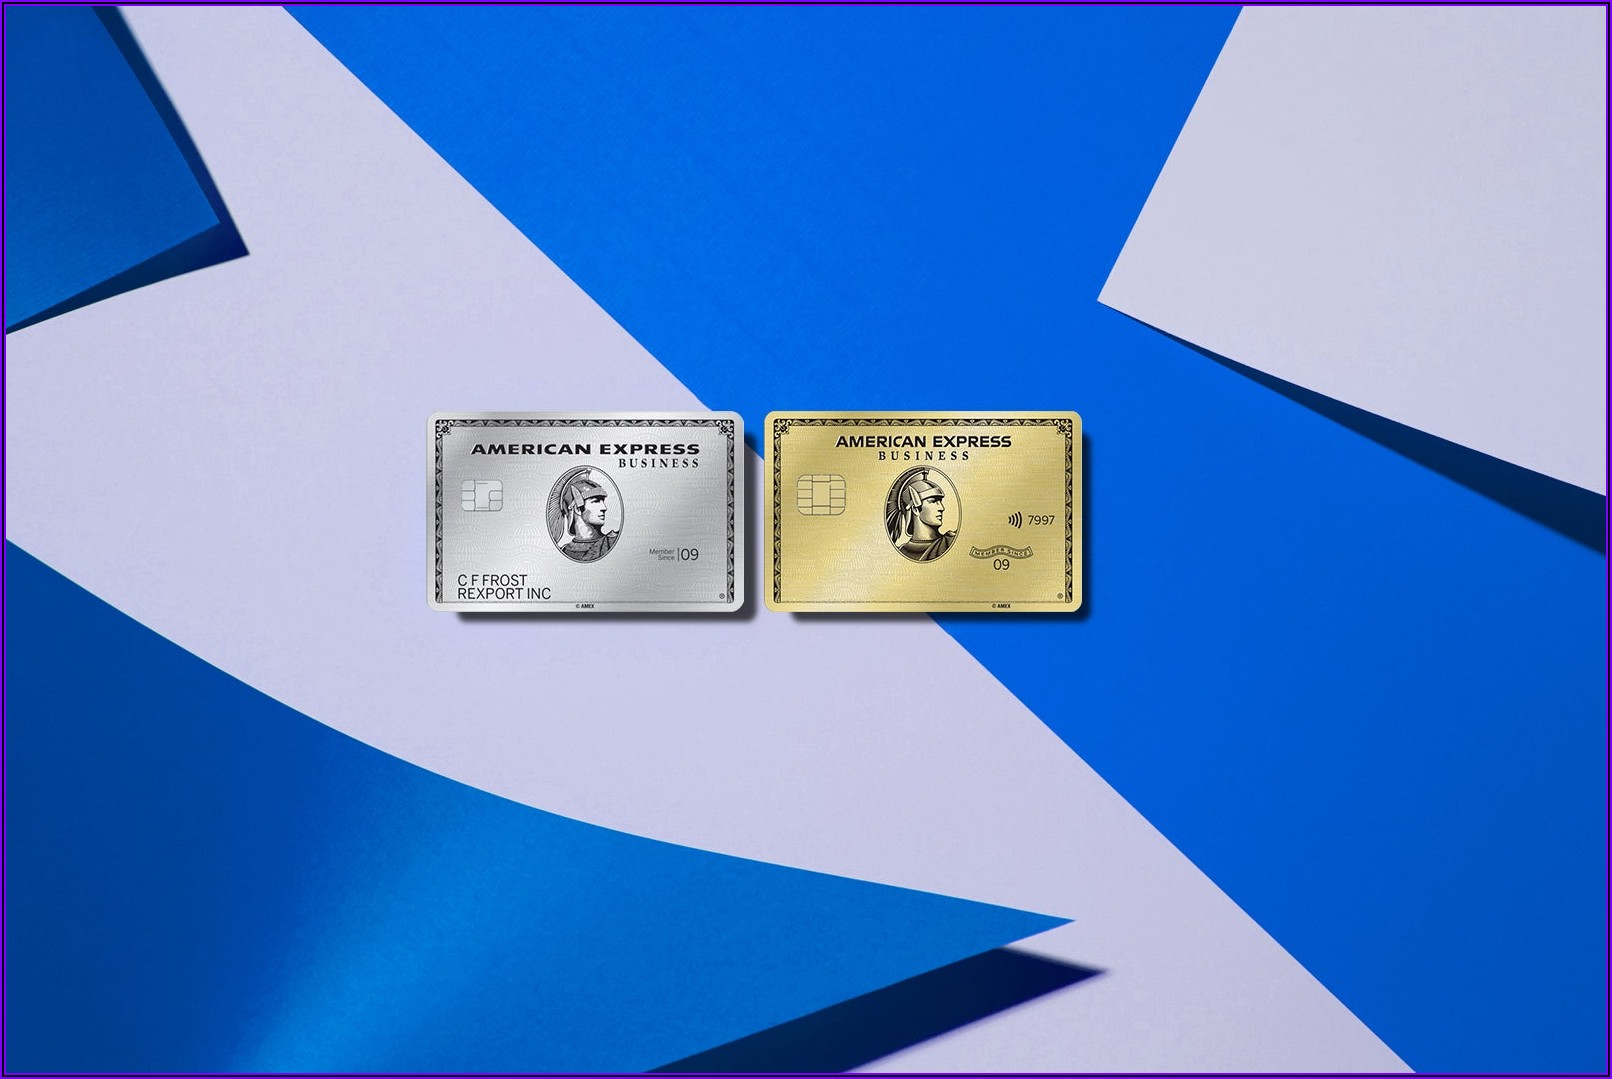 Amex Business Platinum Employee Card Cost